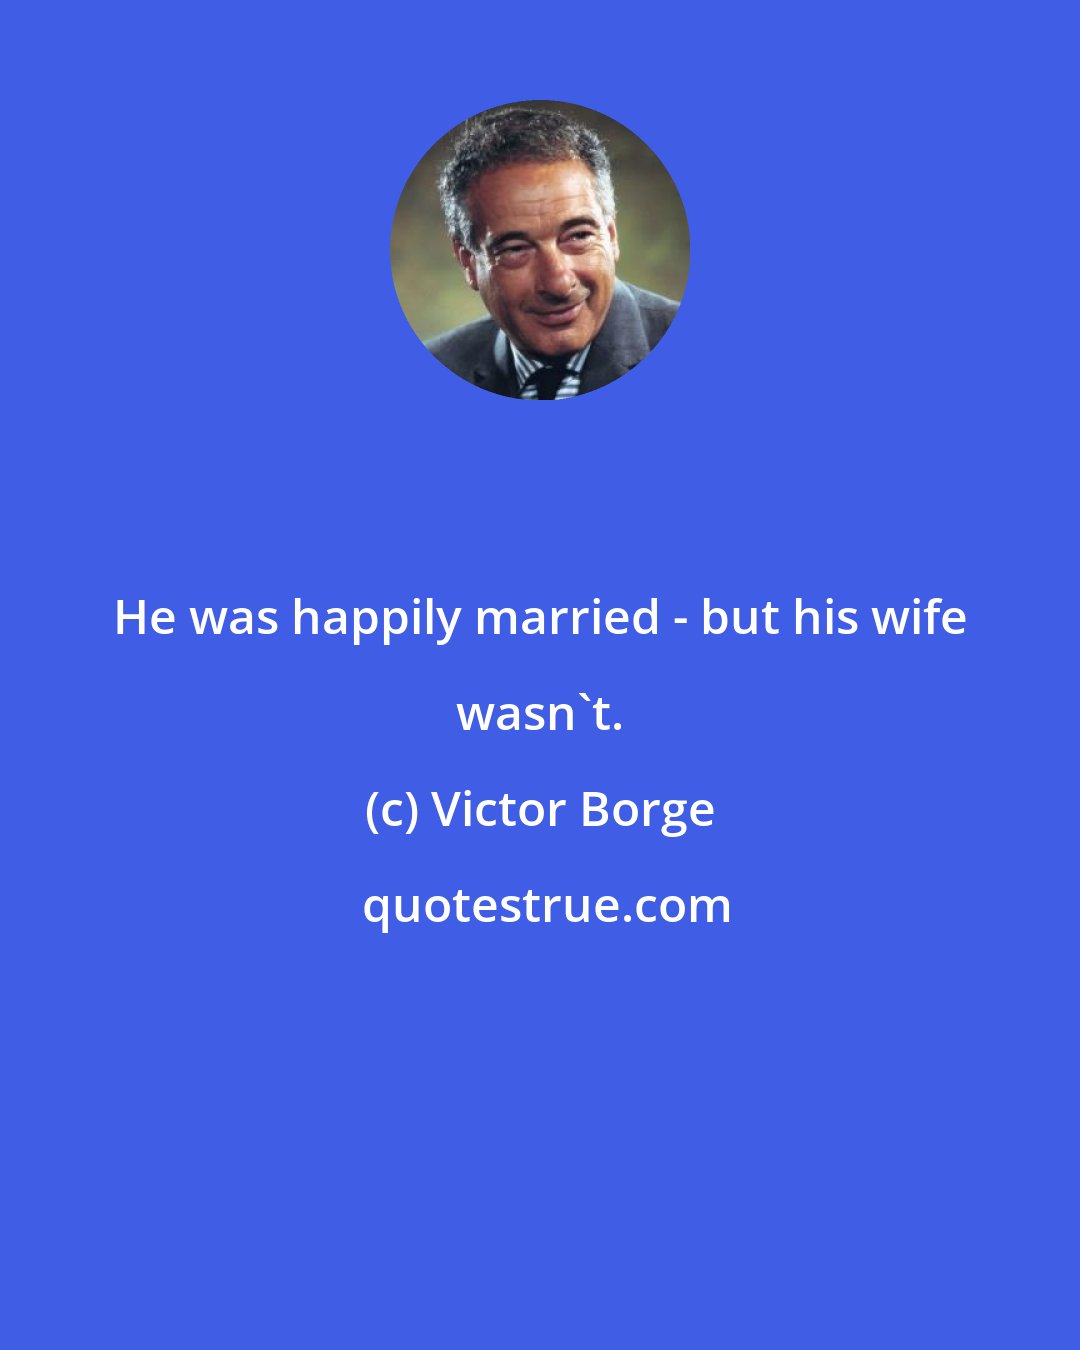 Victor Borge: He was happily married - but his wife wasn't.